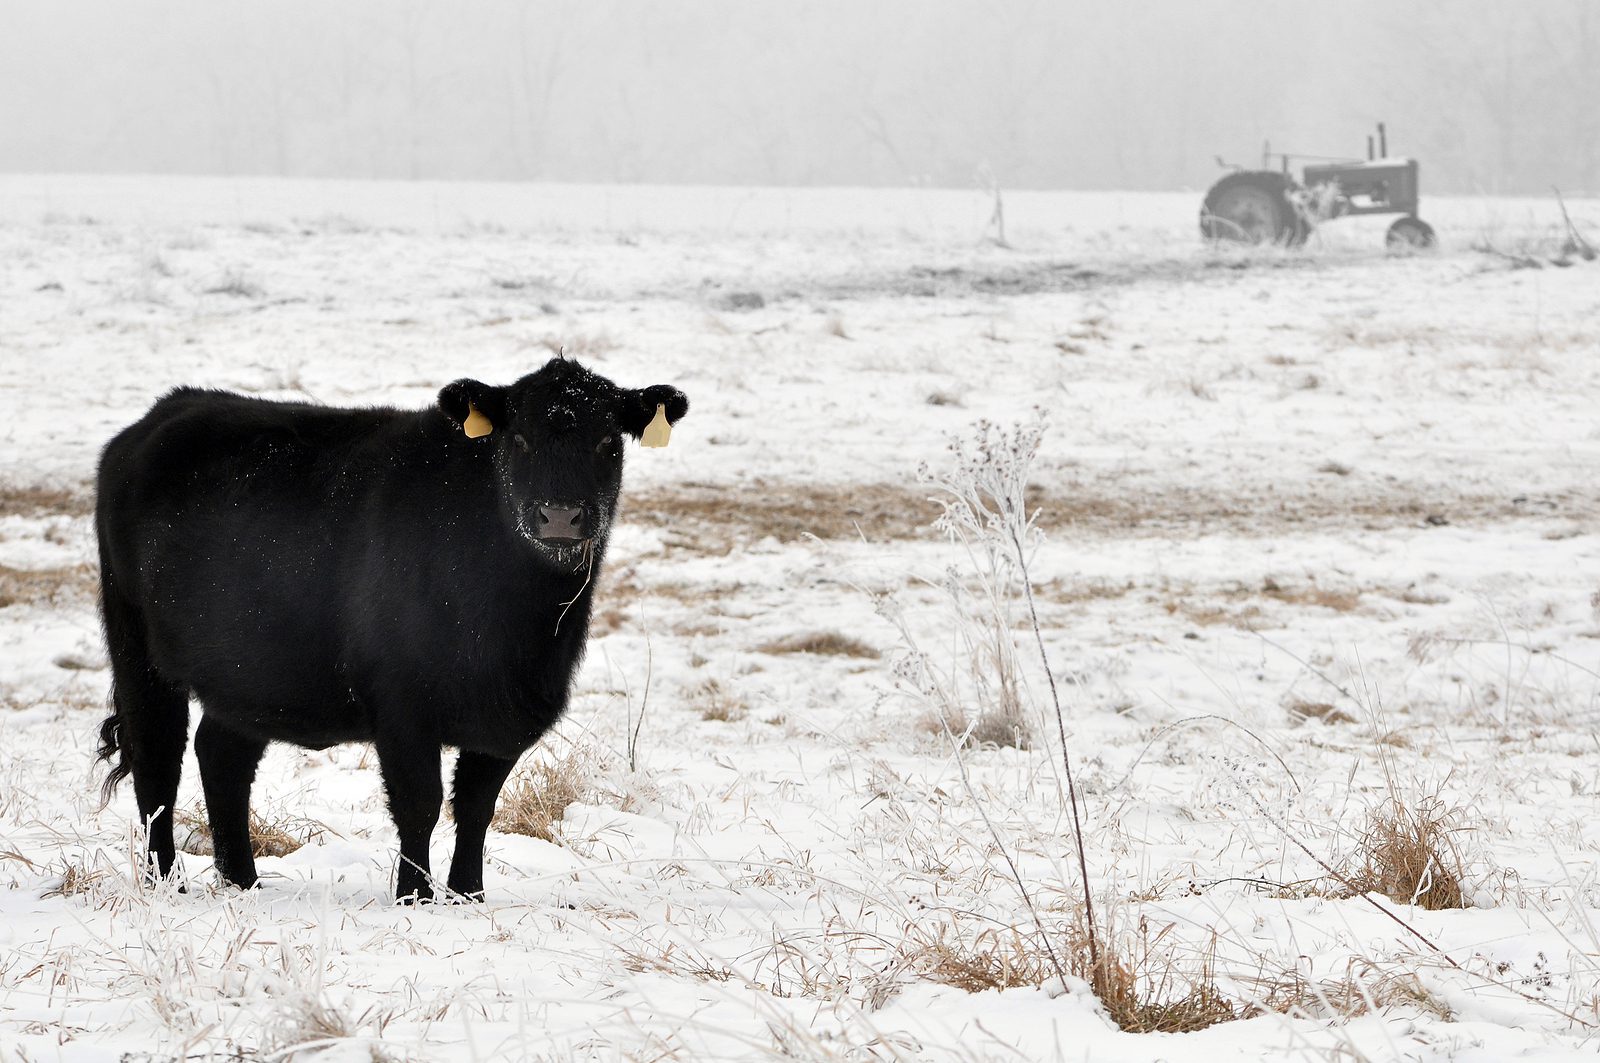 Angus cow grazing in the snow and fog on a winter day